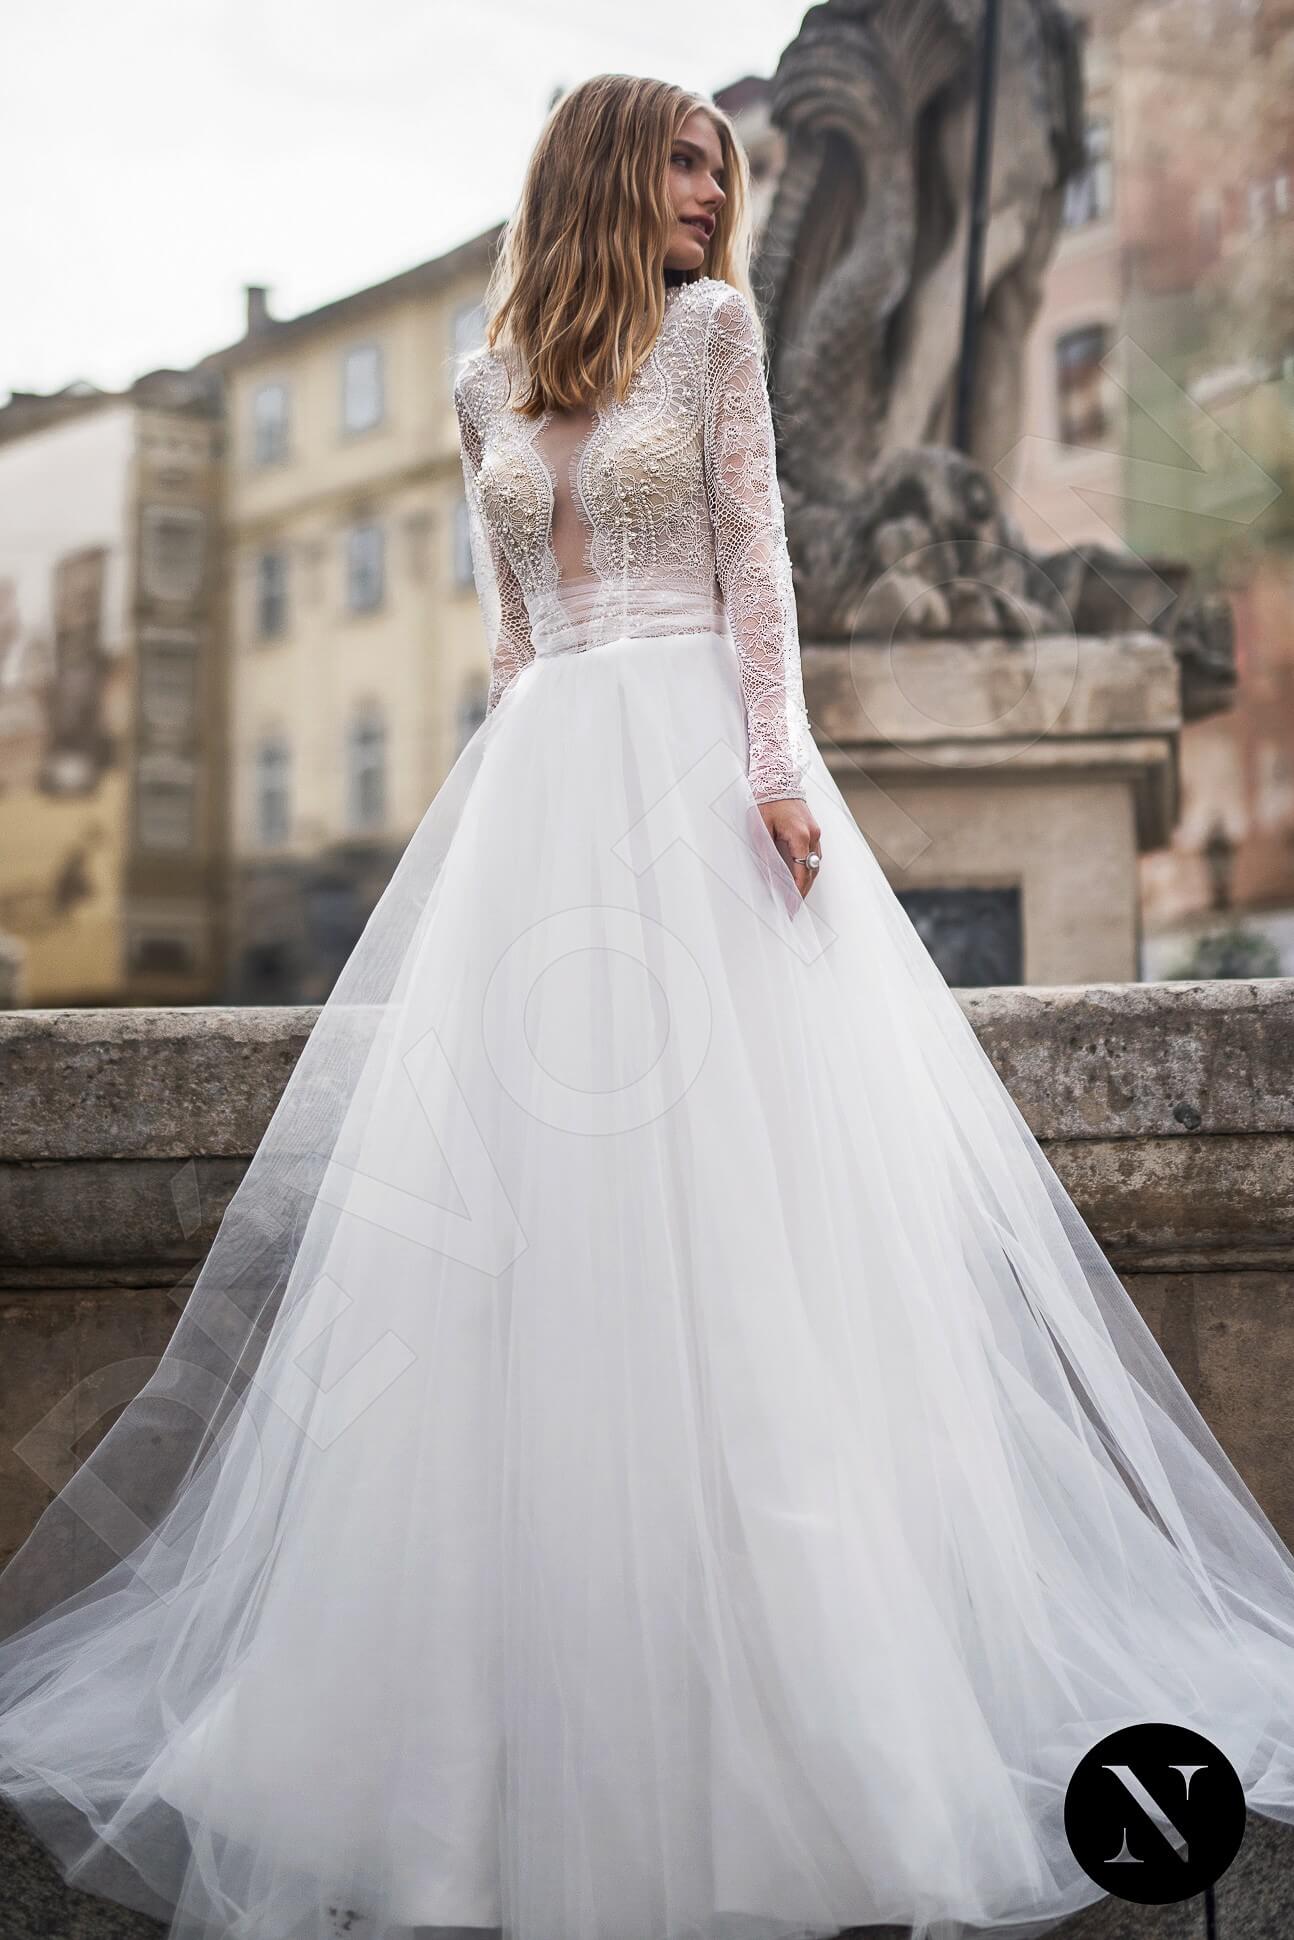 Wedding Dresses Long Sleeve Tulle A Line Bridal Gown Illusion Neck